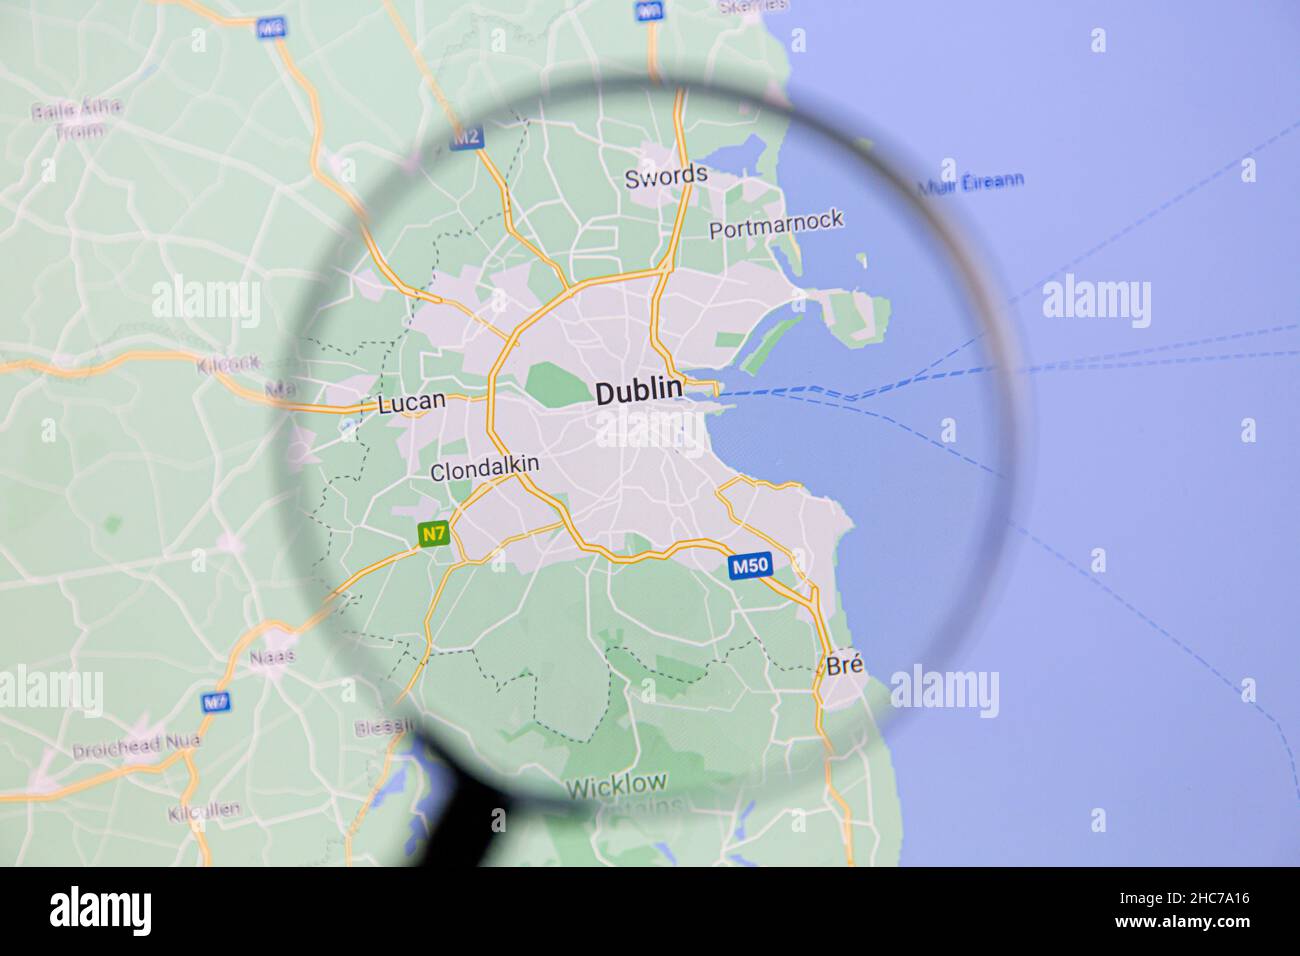 Ostersund, Sweden - Dec 2, 2021: Dublin on Google Maps under a magnifying glass. Dublin is the capital city of Ireland. Stock Photo